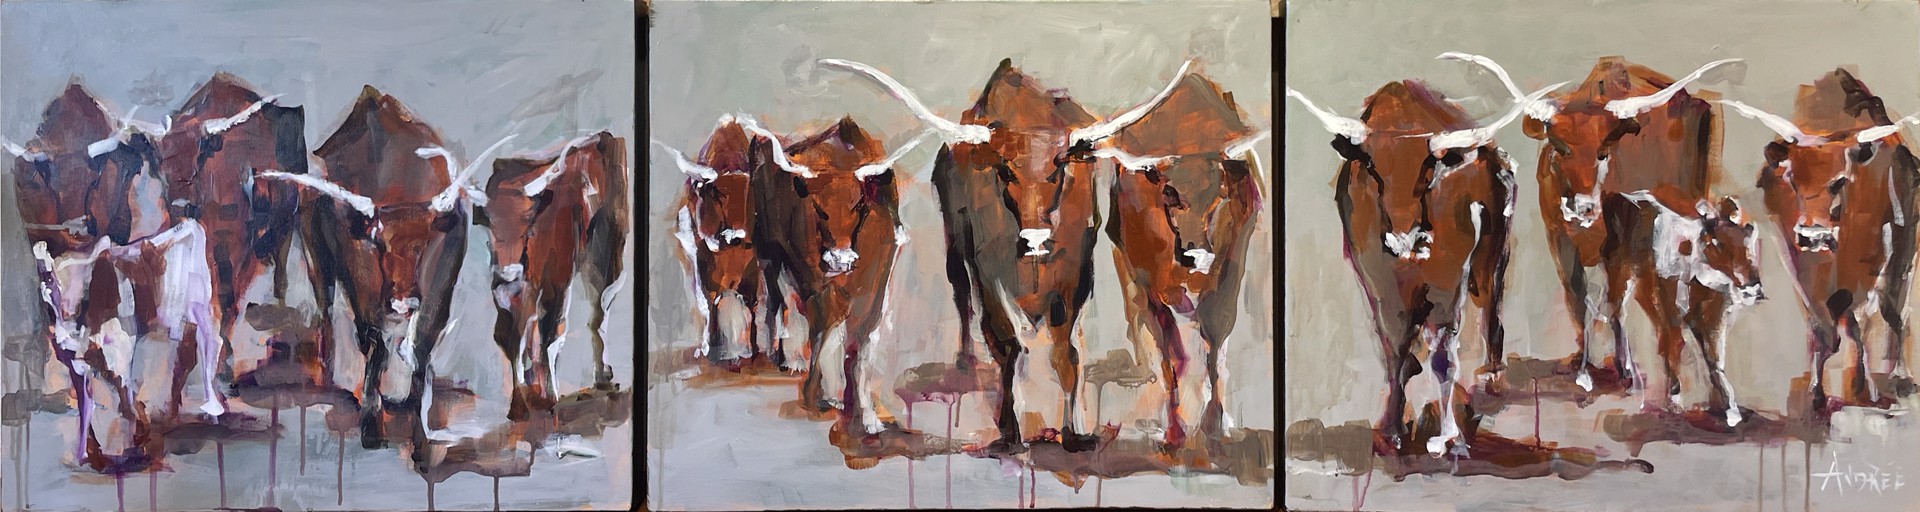 The Roundup (triptych) by Andrée Hudson